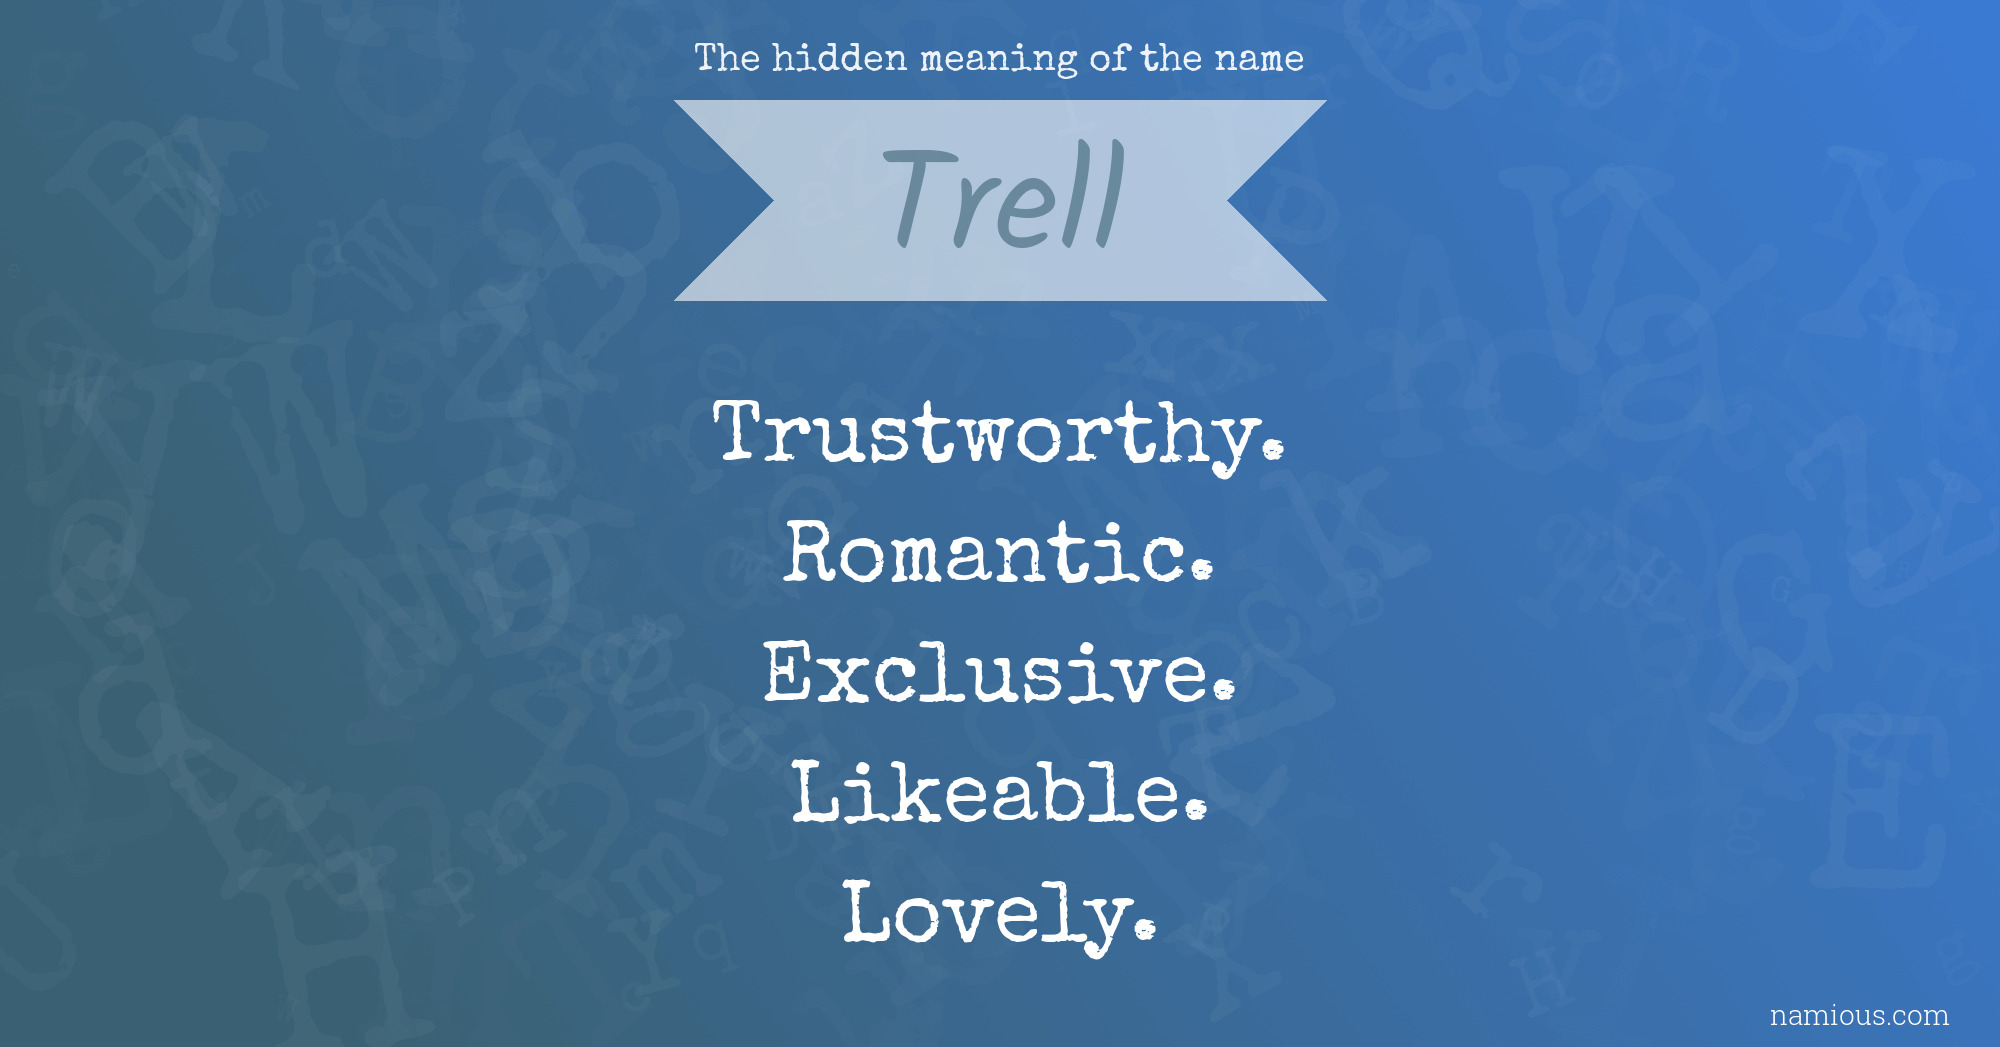 The hidden meaning of the name Trell